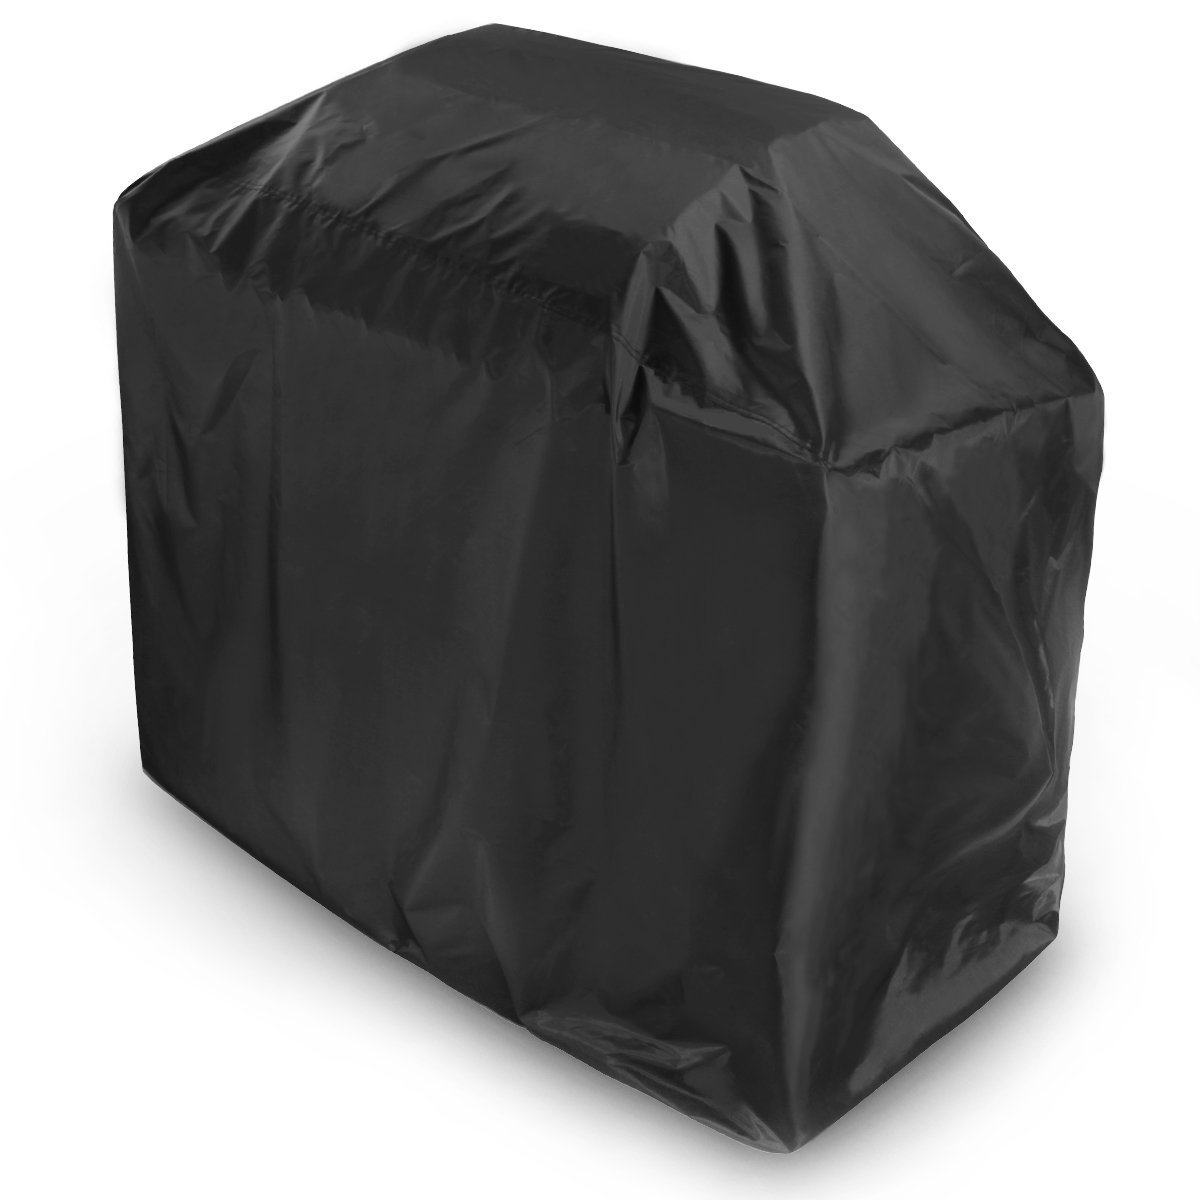 Full-Sizes-Waterproof-BBQ-Grill-Cover-Outdoor-Anti-Dust-Rain-Gas-Charcoal-Electric-Protector-Covers--1702573-6